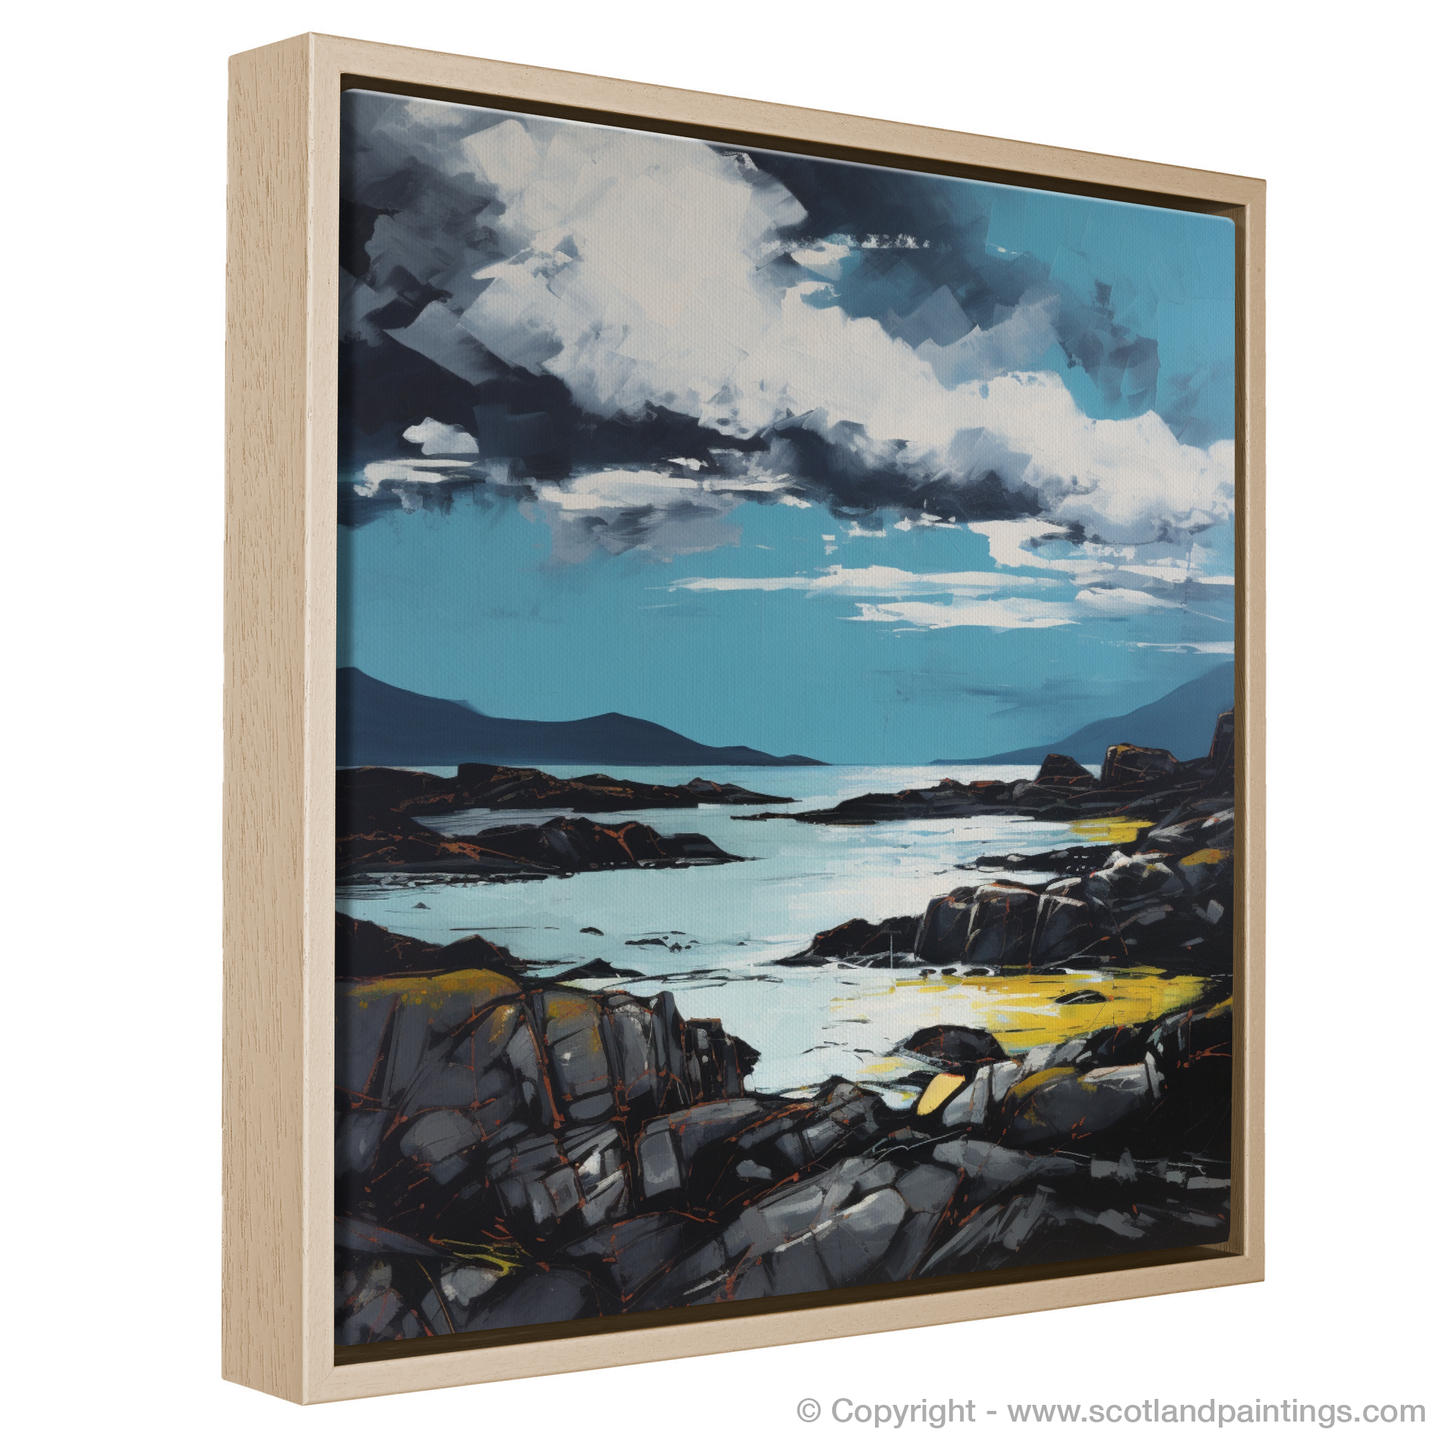 Painting and Art Print of Isle of Harris, Outer Hebrides entitled "Isle of Harris: An Expressionist Ode to Rugged Beauty".